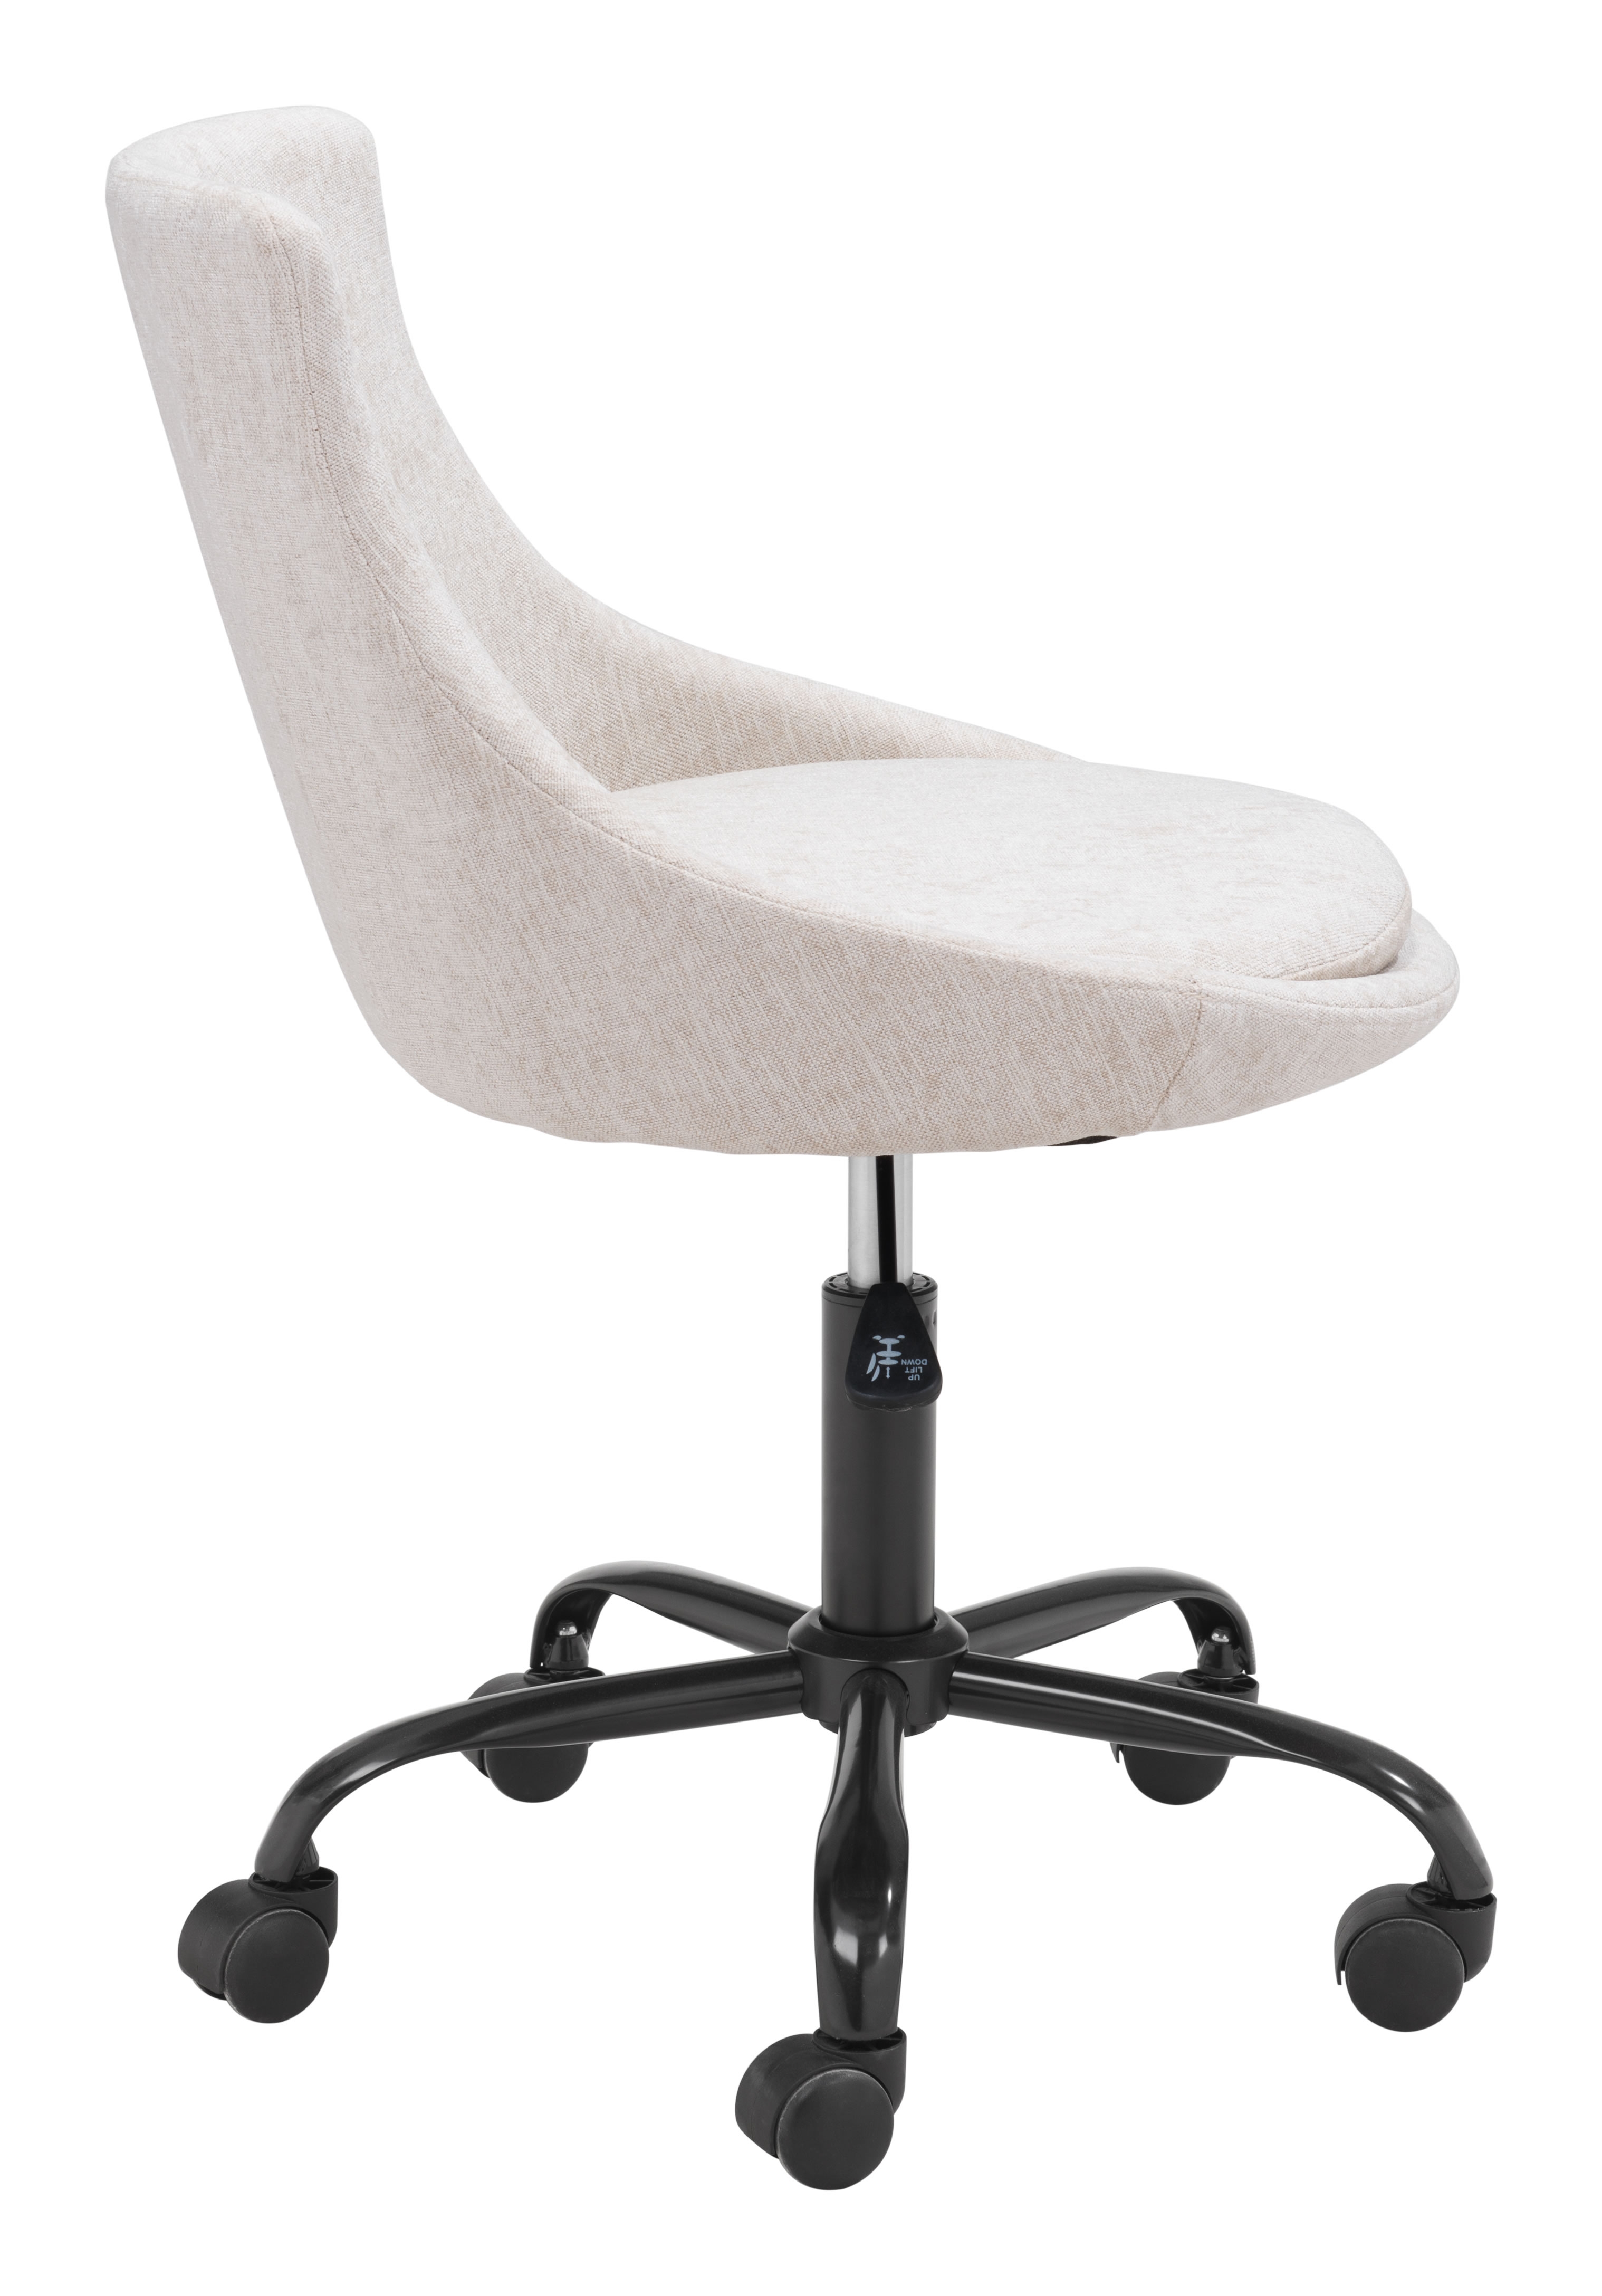 Maury Office Chair, Beige - Image 6